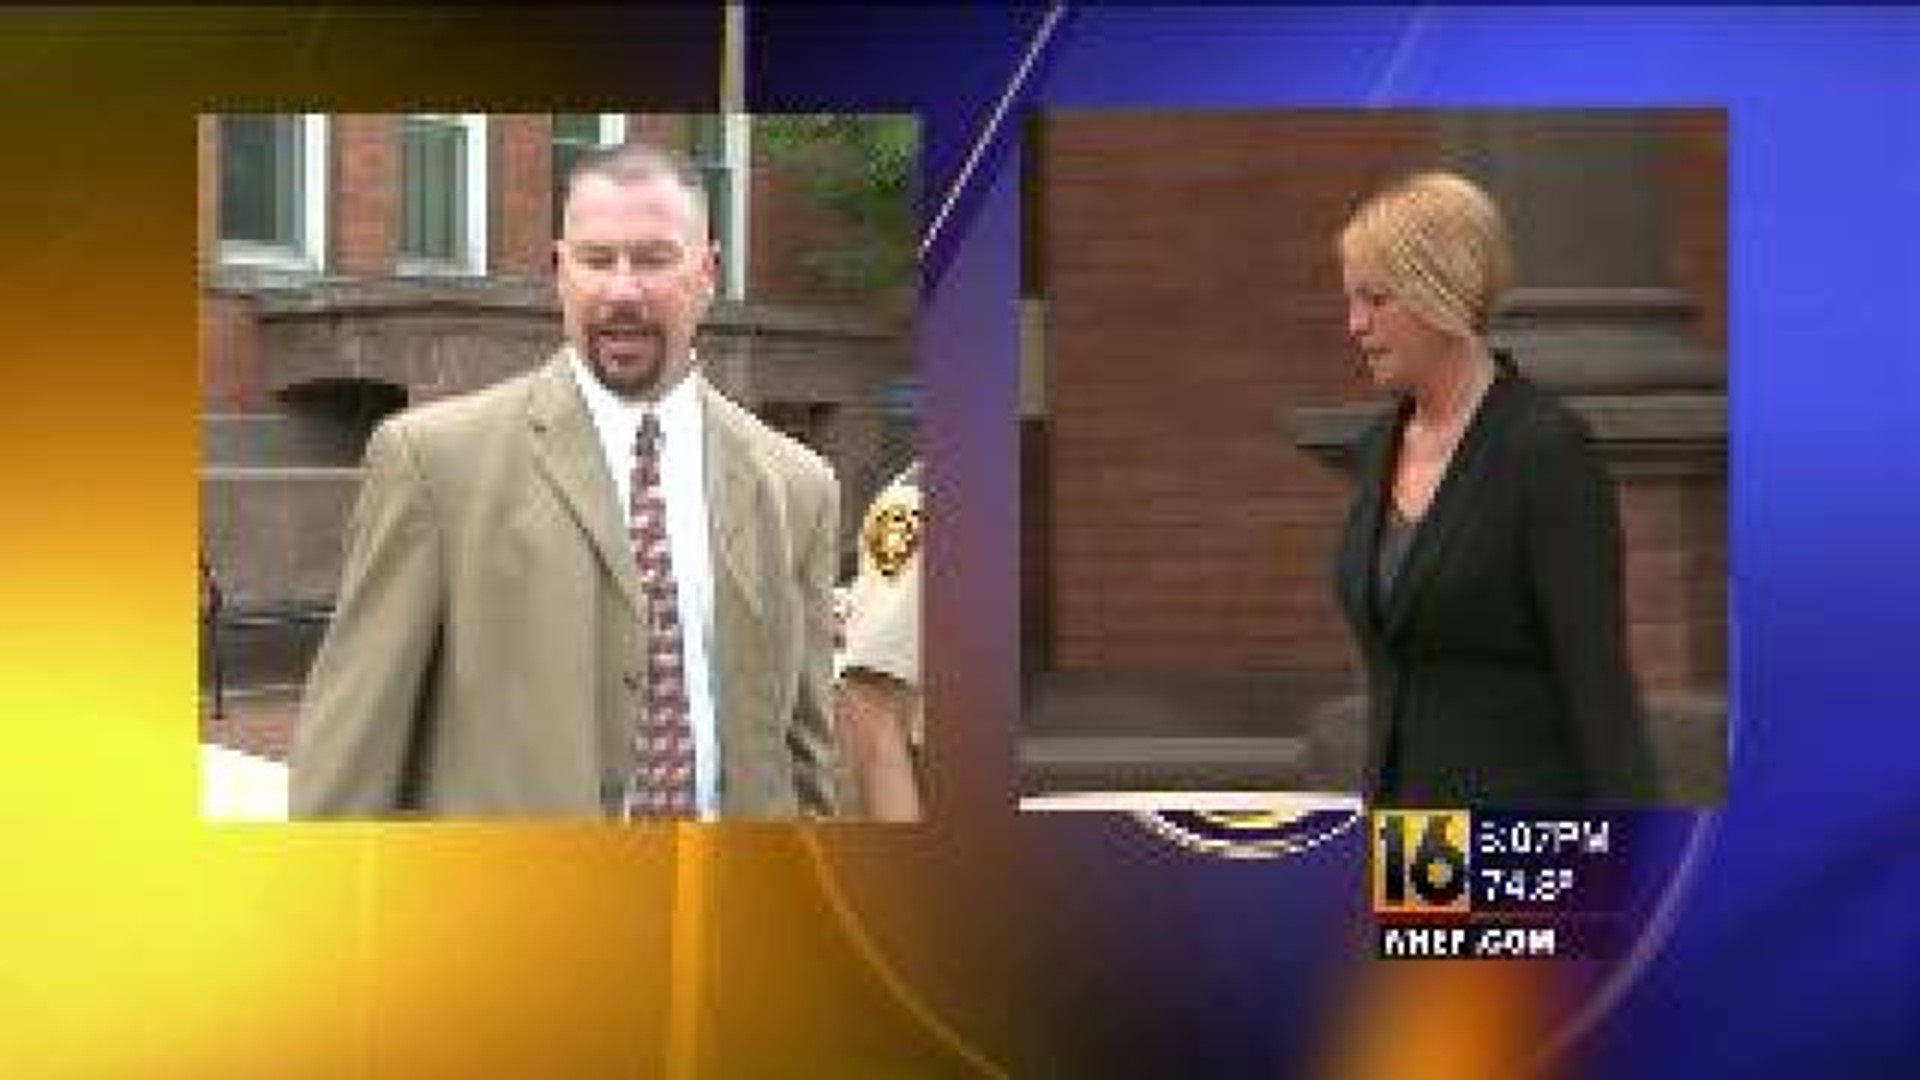 PFA Granted Against Millville Police Chief